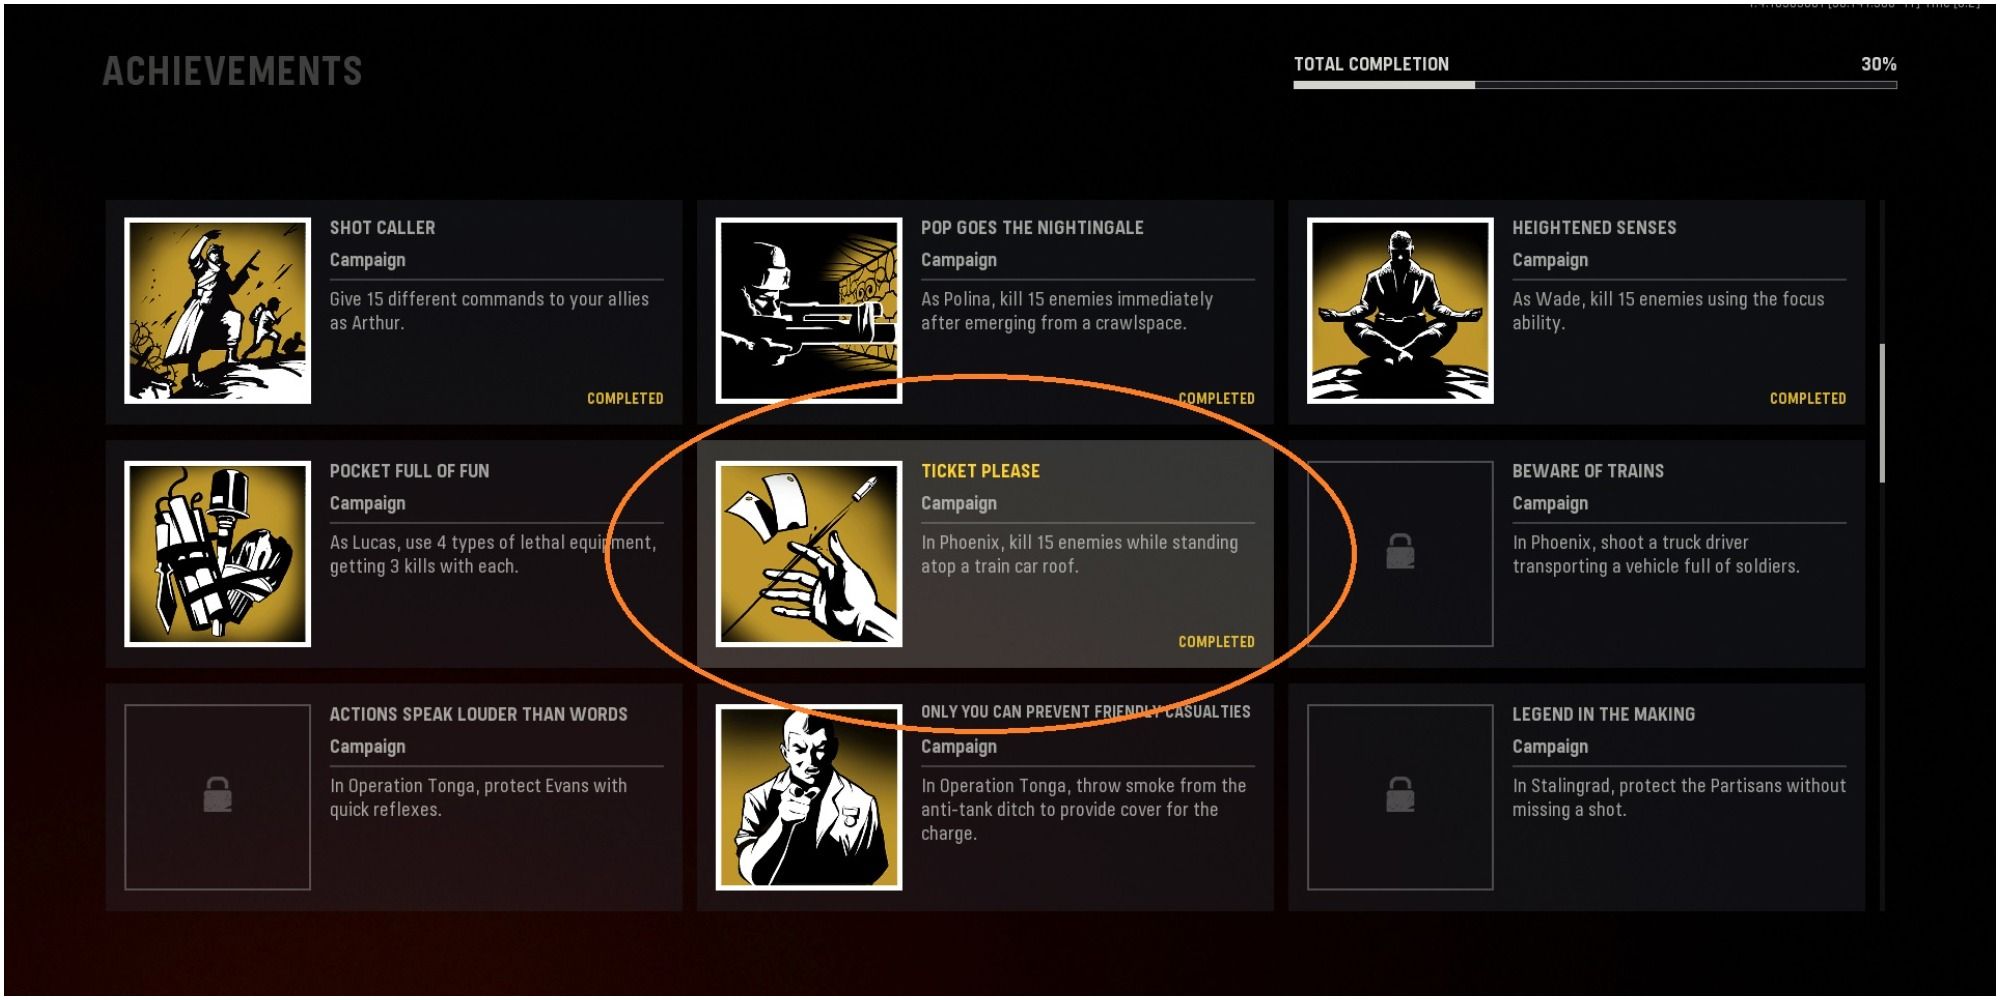 Call Of Duty Vanguard Details Of The Ticket Please Achievement